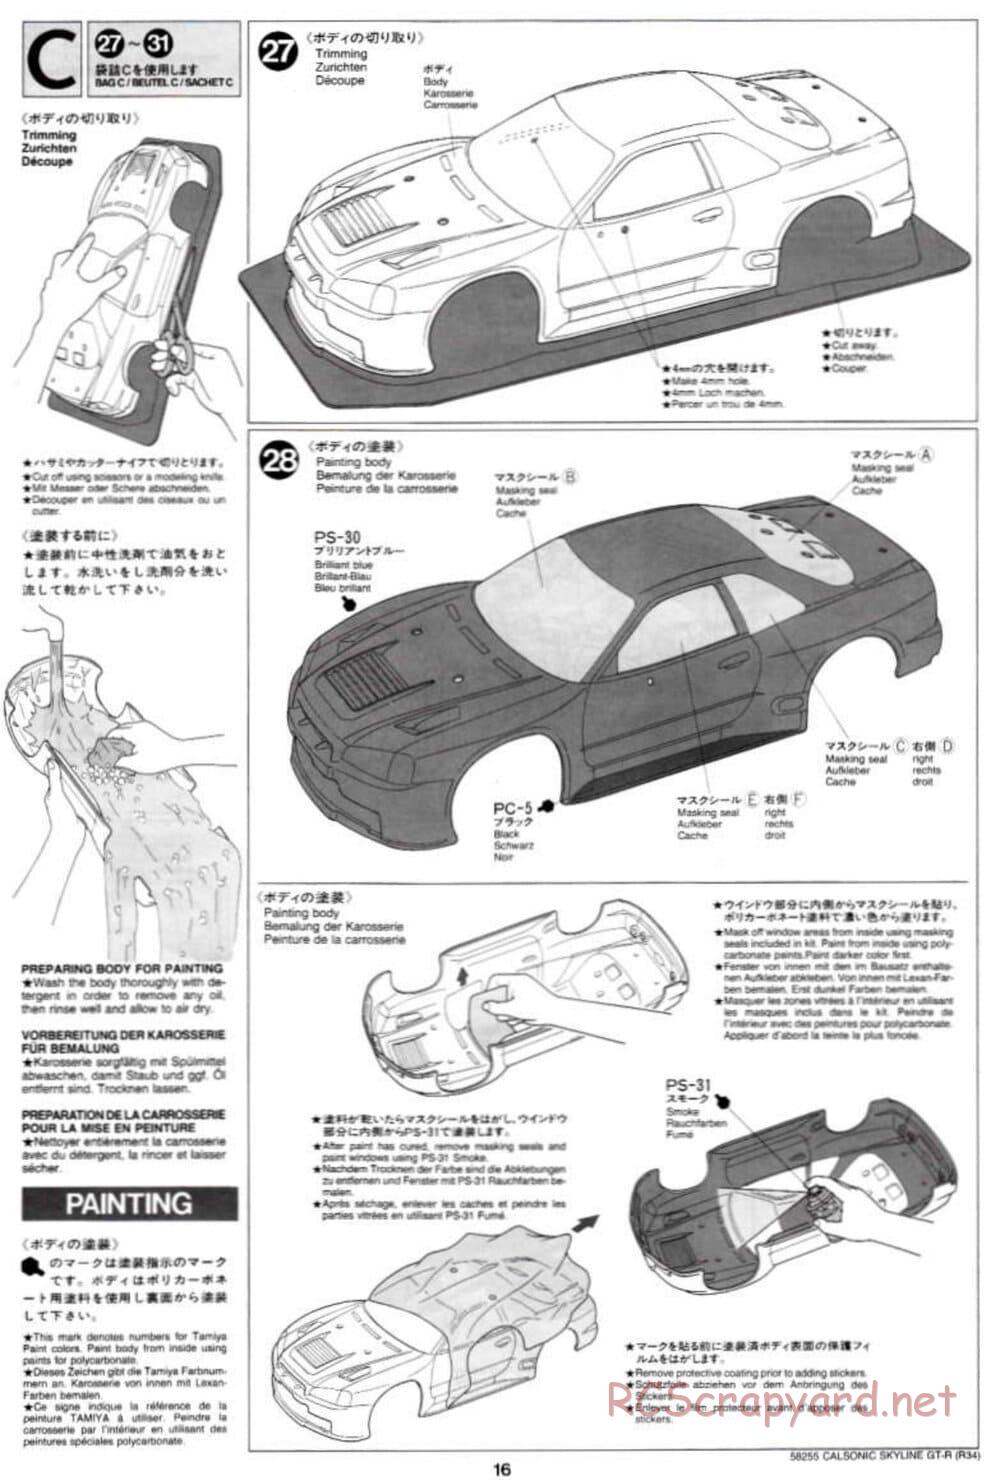 Tamiya - Calsonic Skyline GT-R (R34) - TL-01 Chassis - Manual - Page 16